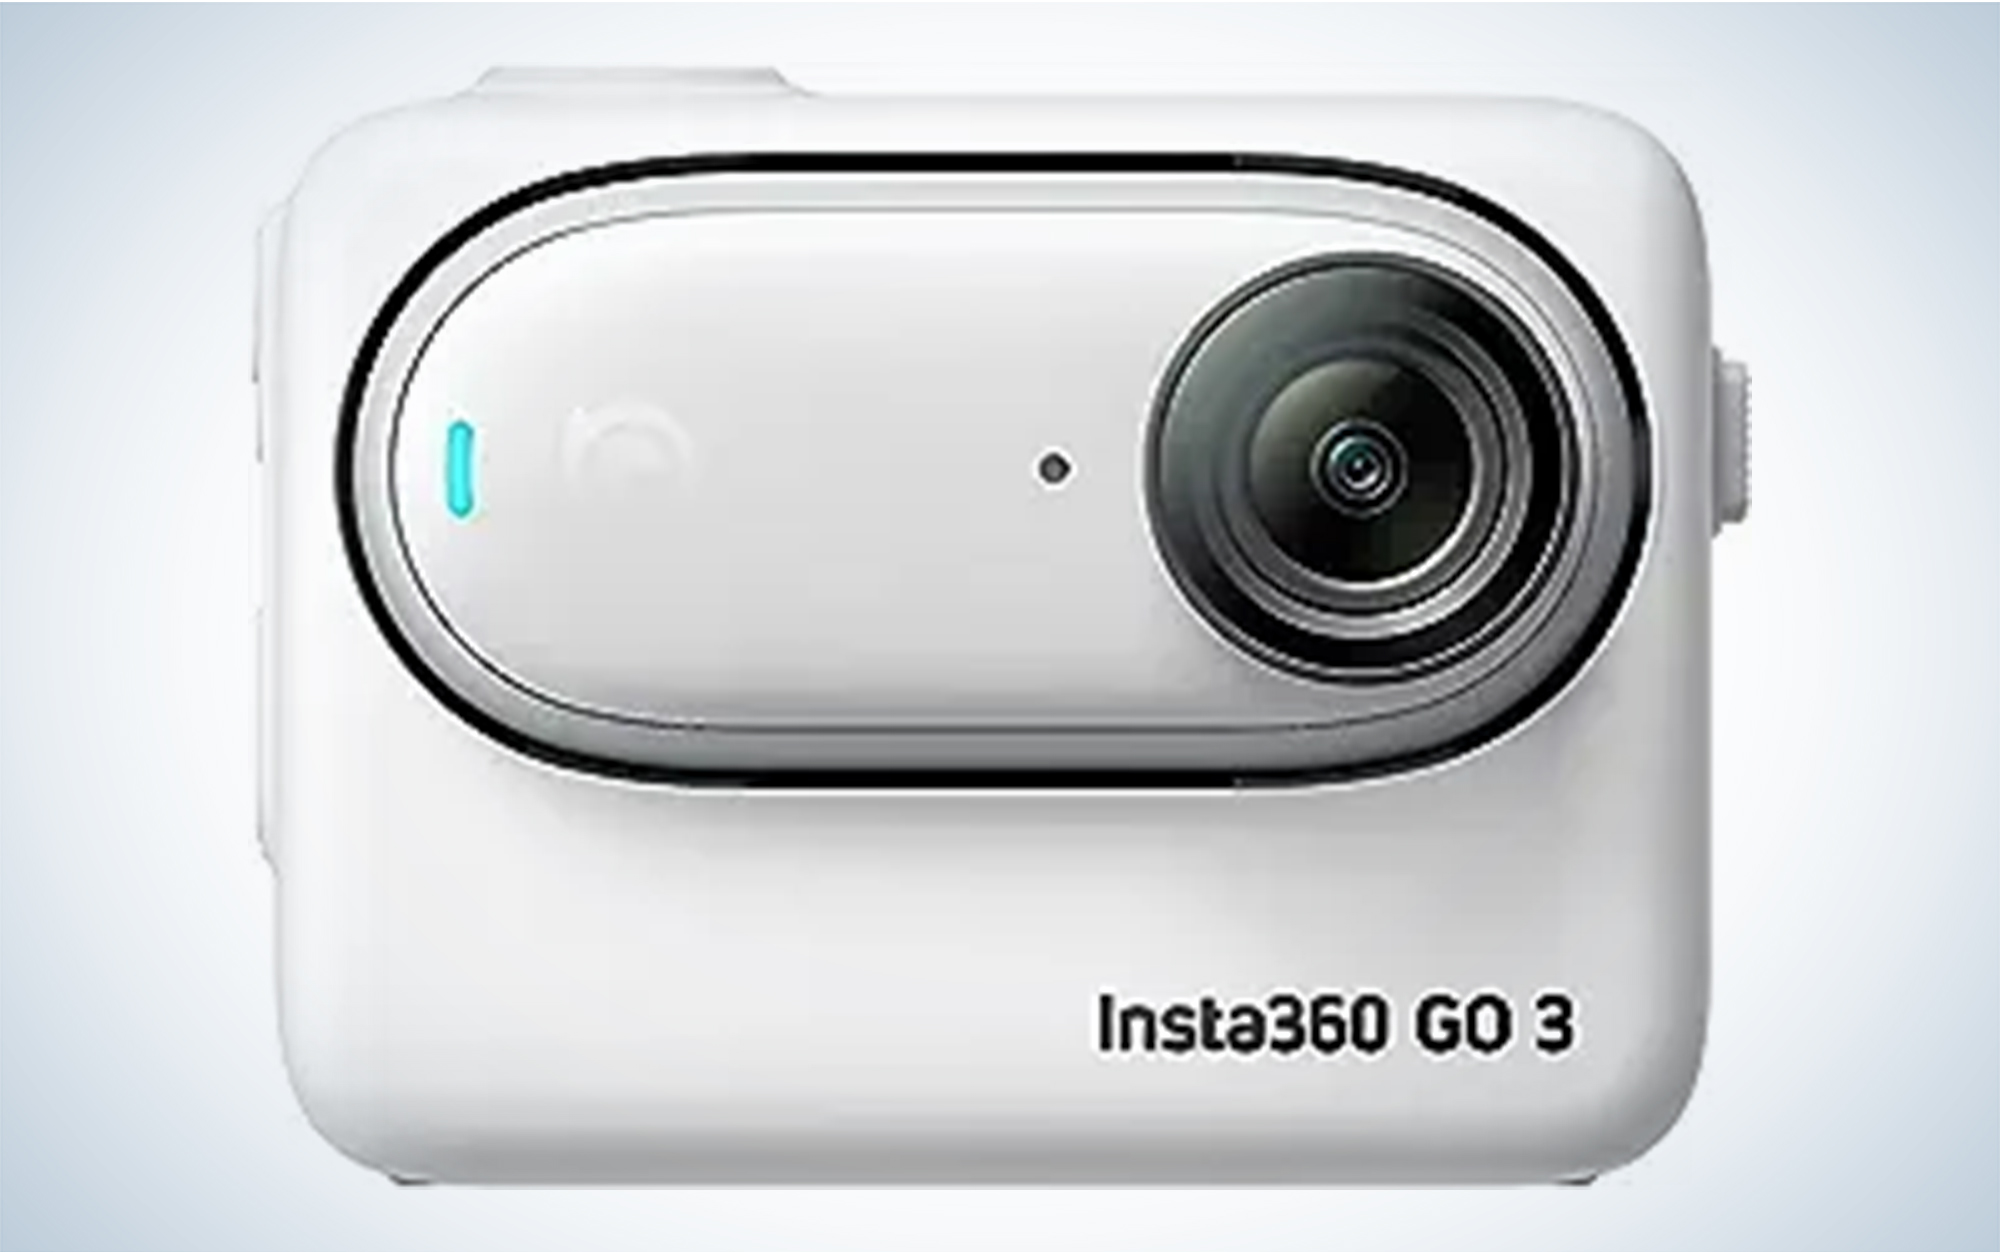 We reviewed the Insta 360 Go 3.